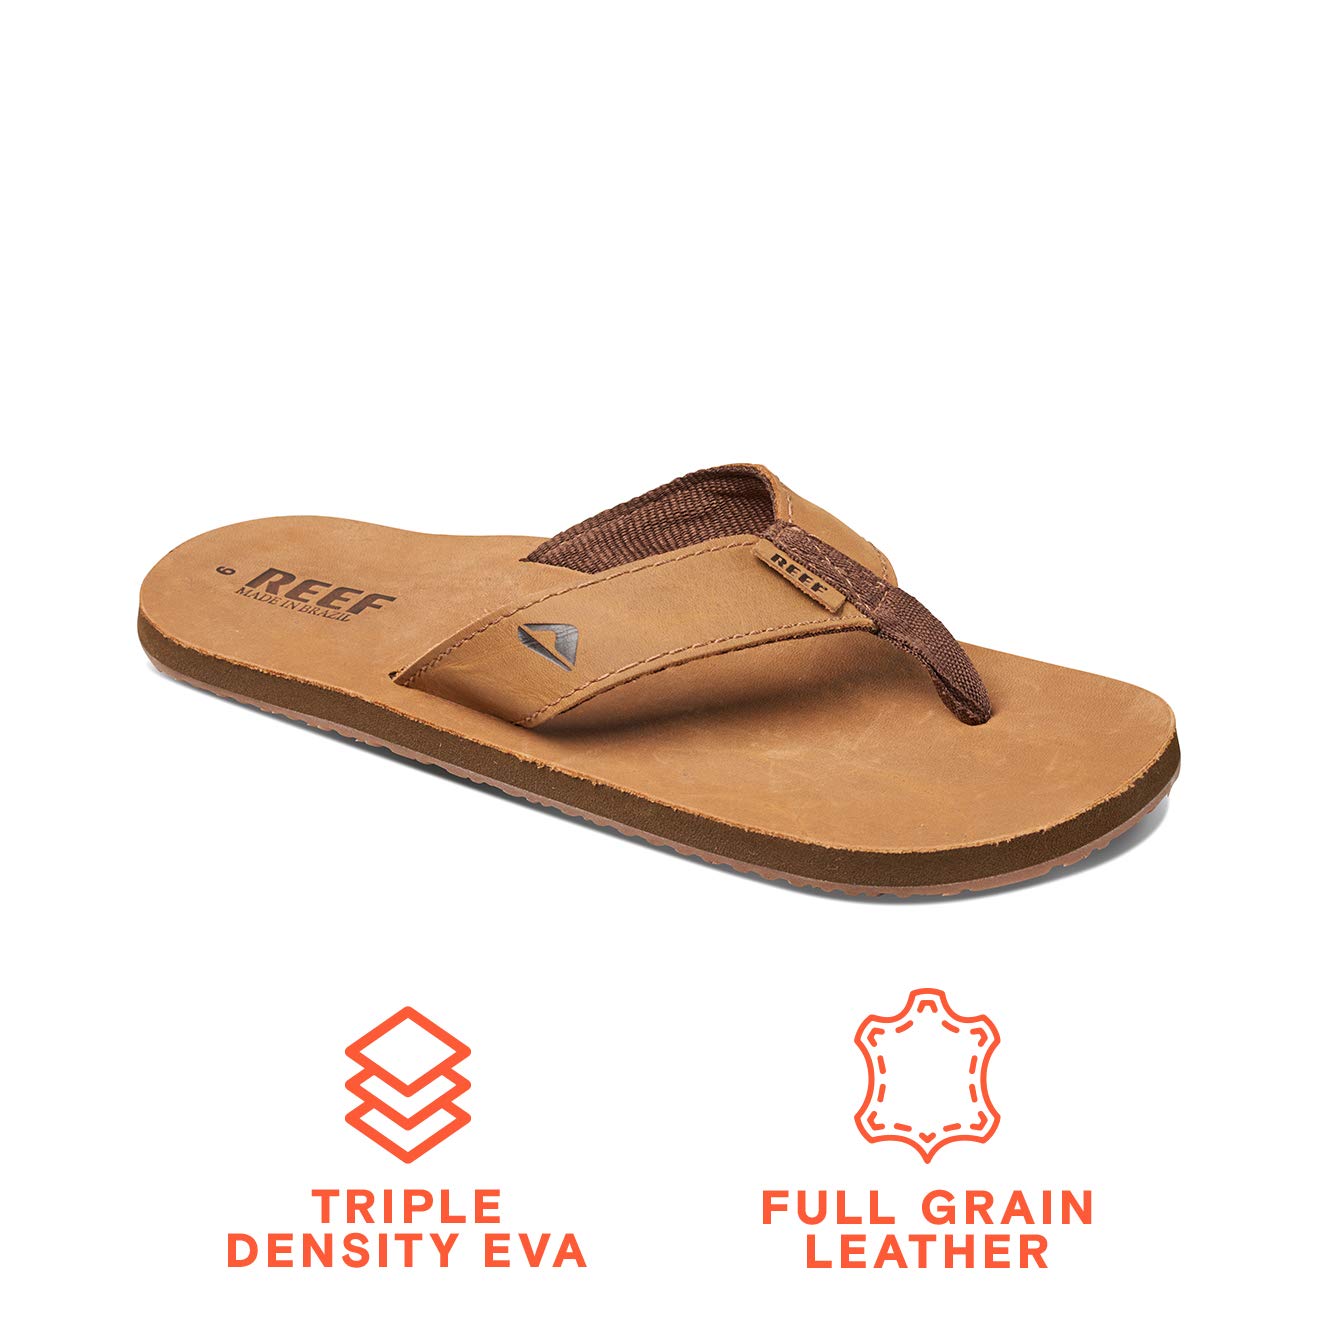 Reef Men's Leather Smoothy Sandal